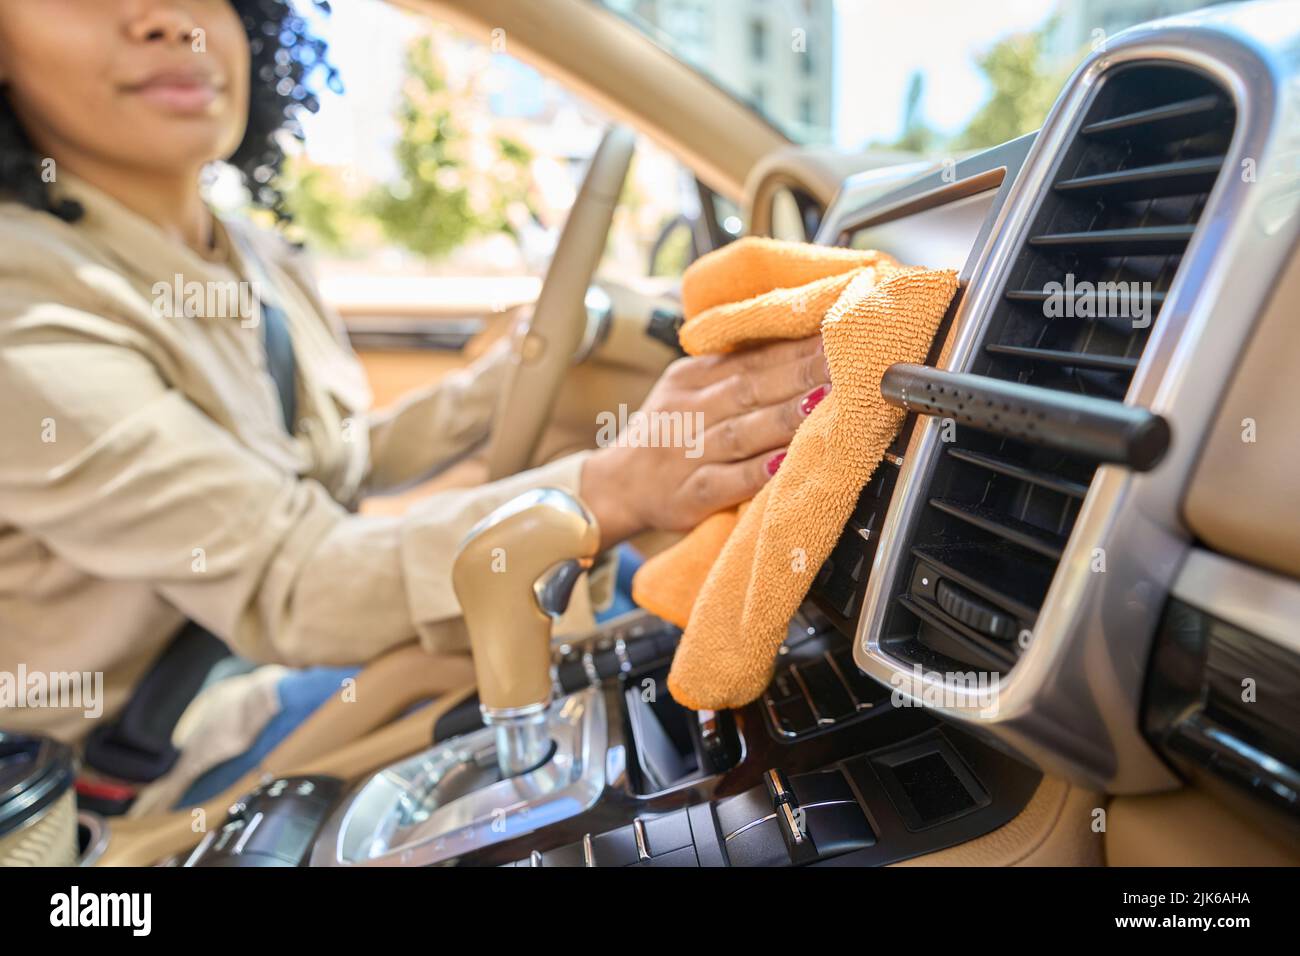 Woman wipes car interior with rag, hand auto wash Stock Photo by NomadSoul1